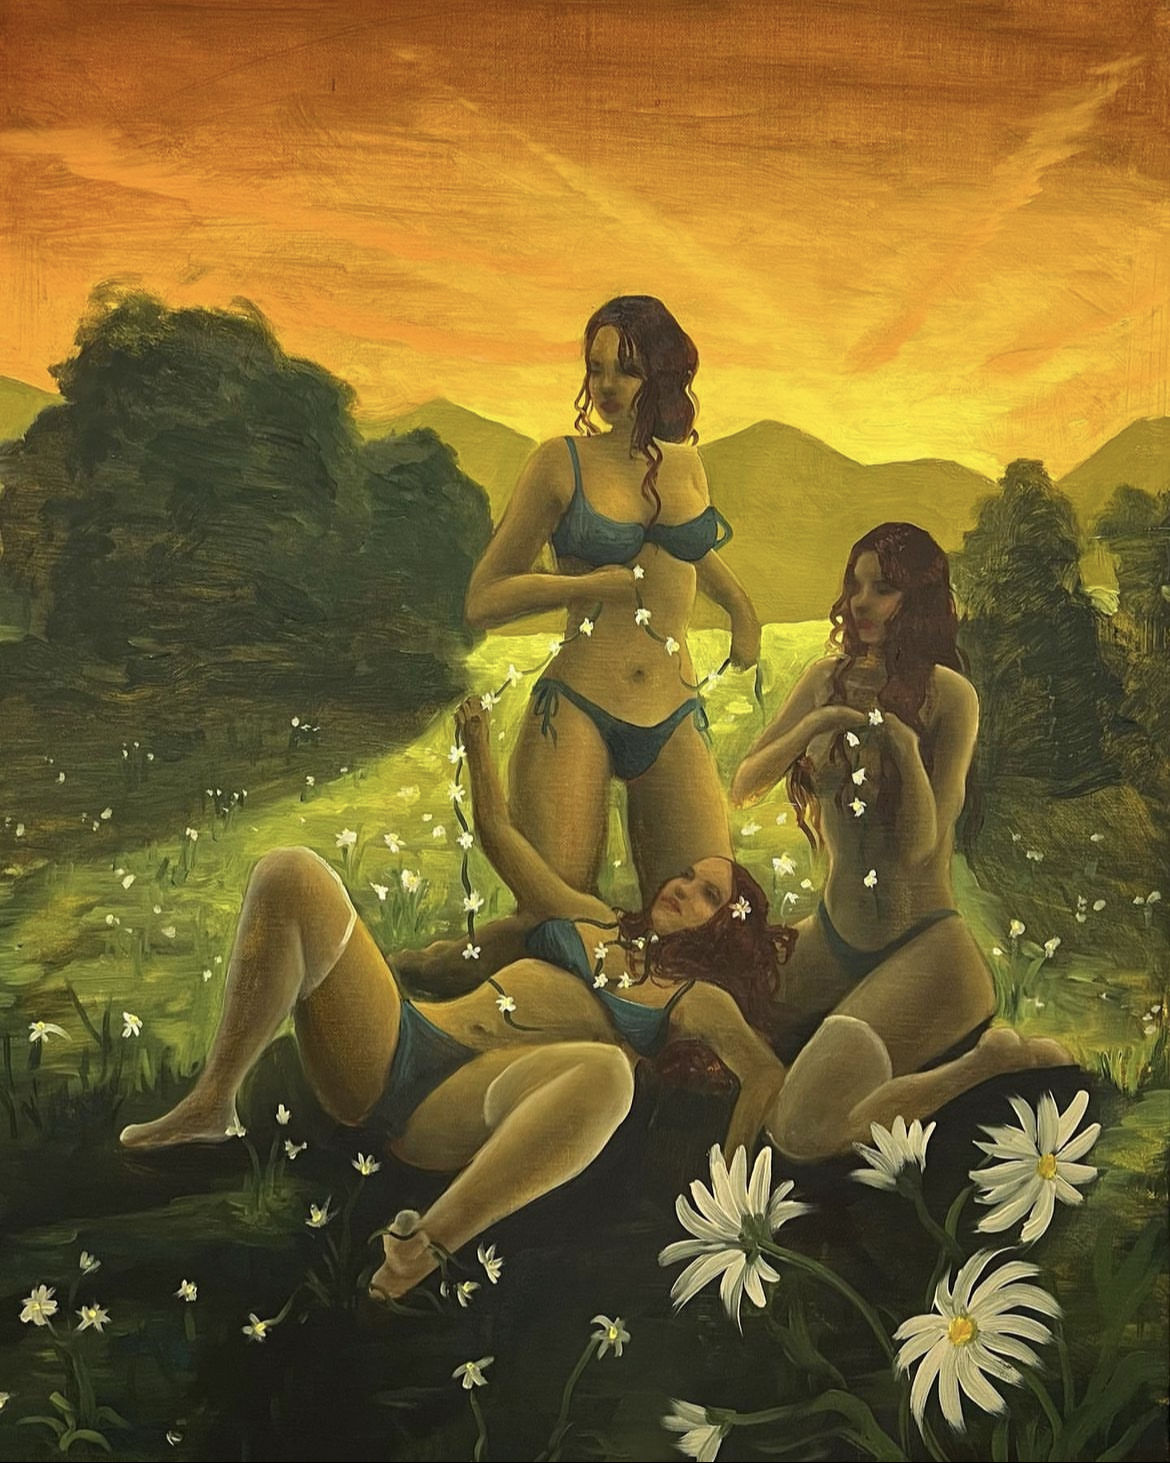 An oil painting of three women making daisy chains in blue bikinis in a big grass field with a glowing orange sky in the horizon.